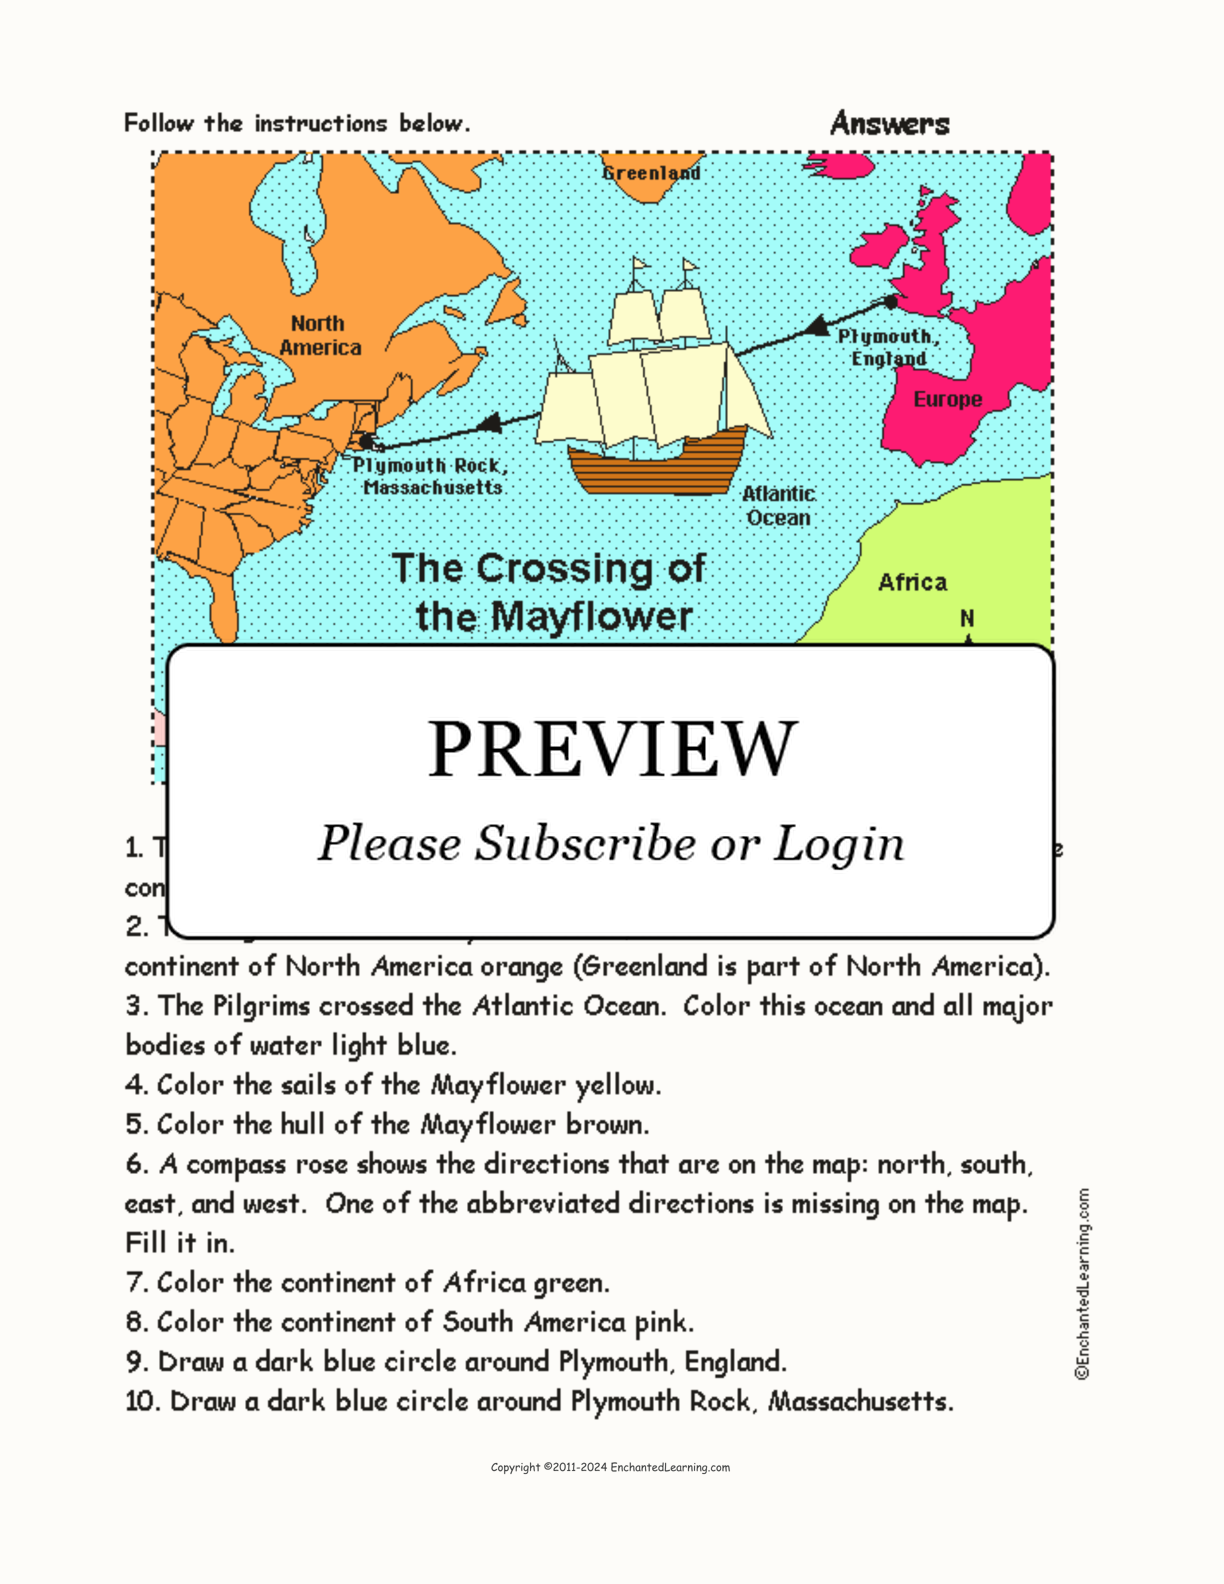 Crossing of the Mayflower - Follow the Instructions interactive worksheet page 2